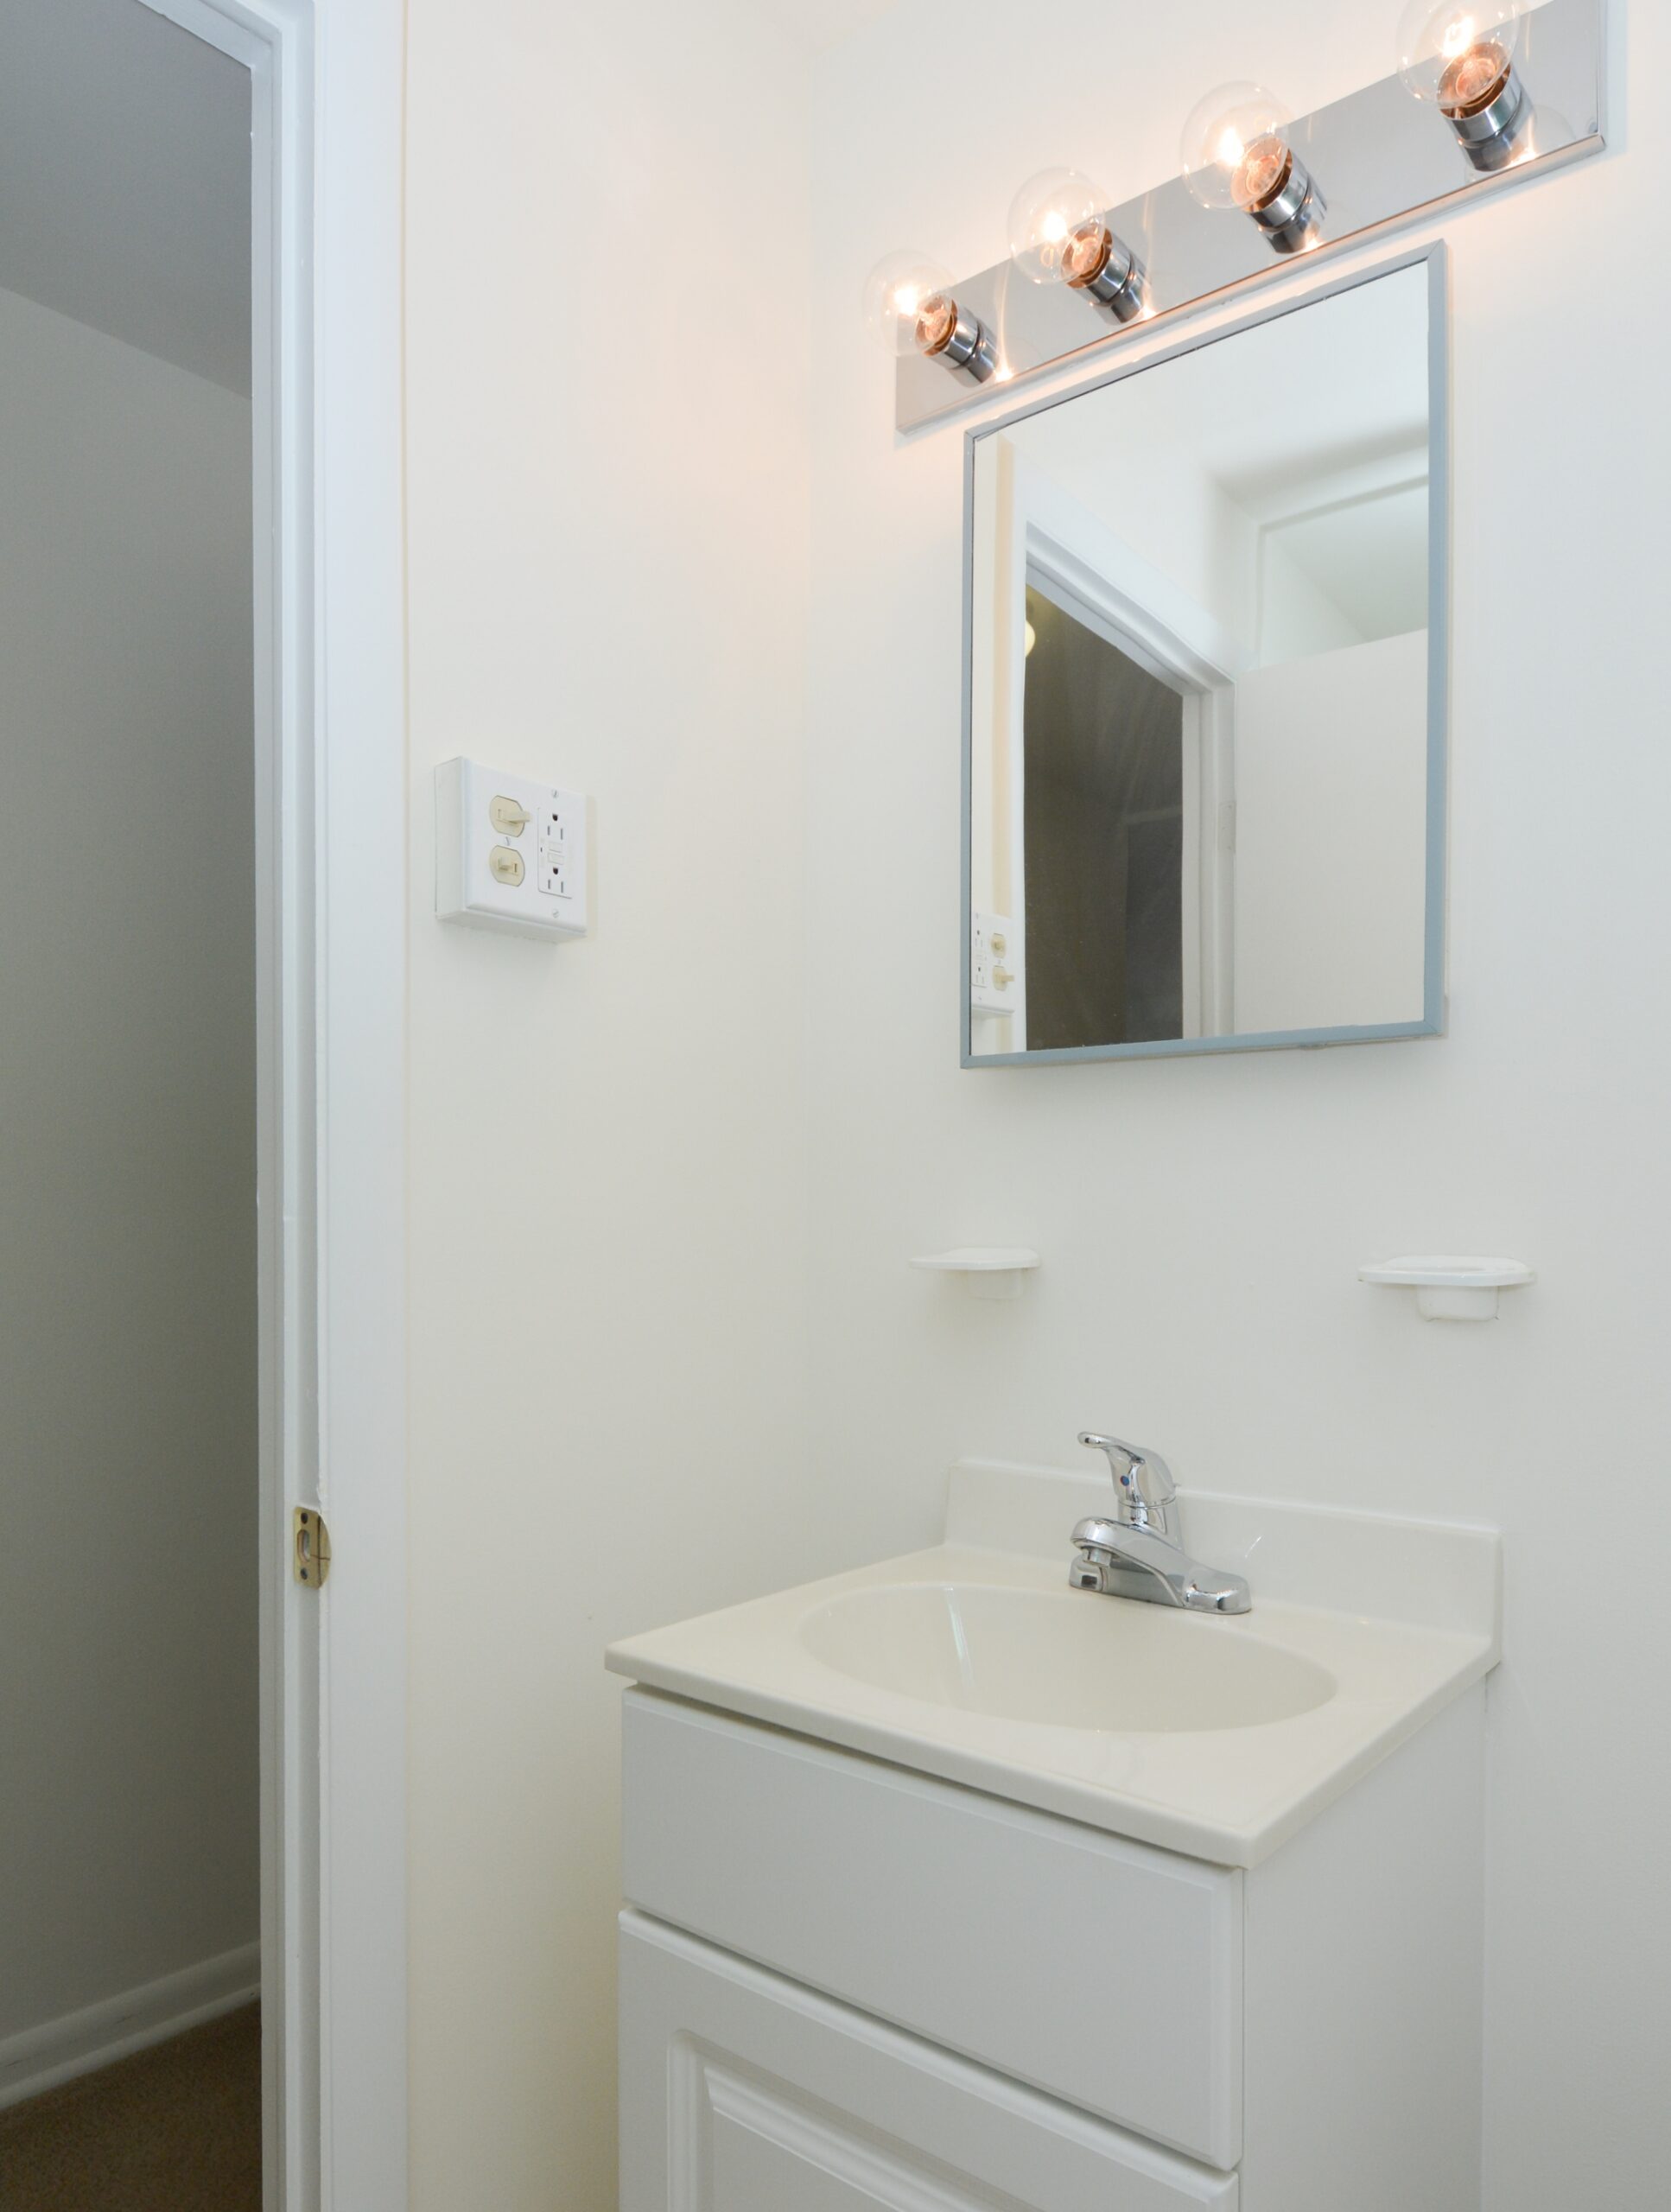 Bathroom area of an apartment fitted with a single vanity, a huge mirror, and lighting